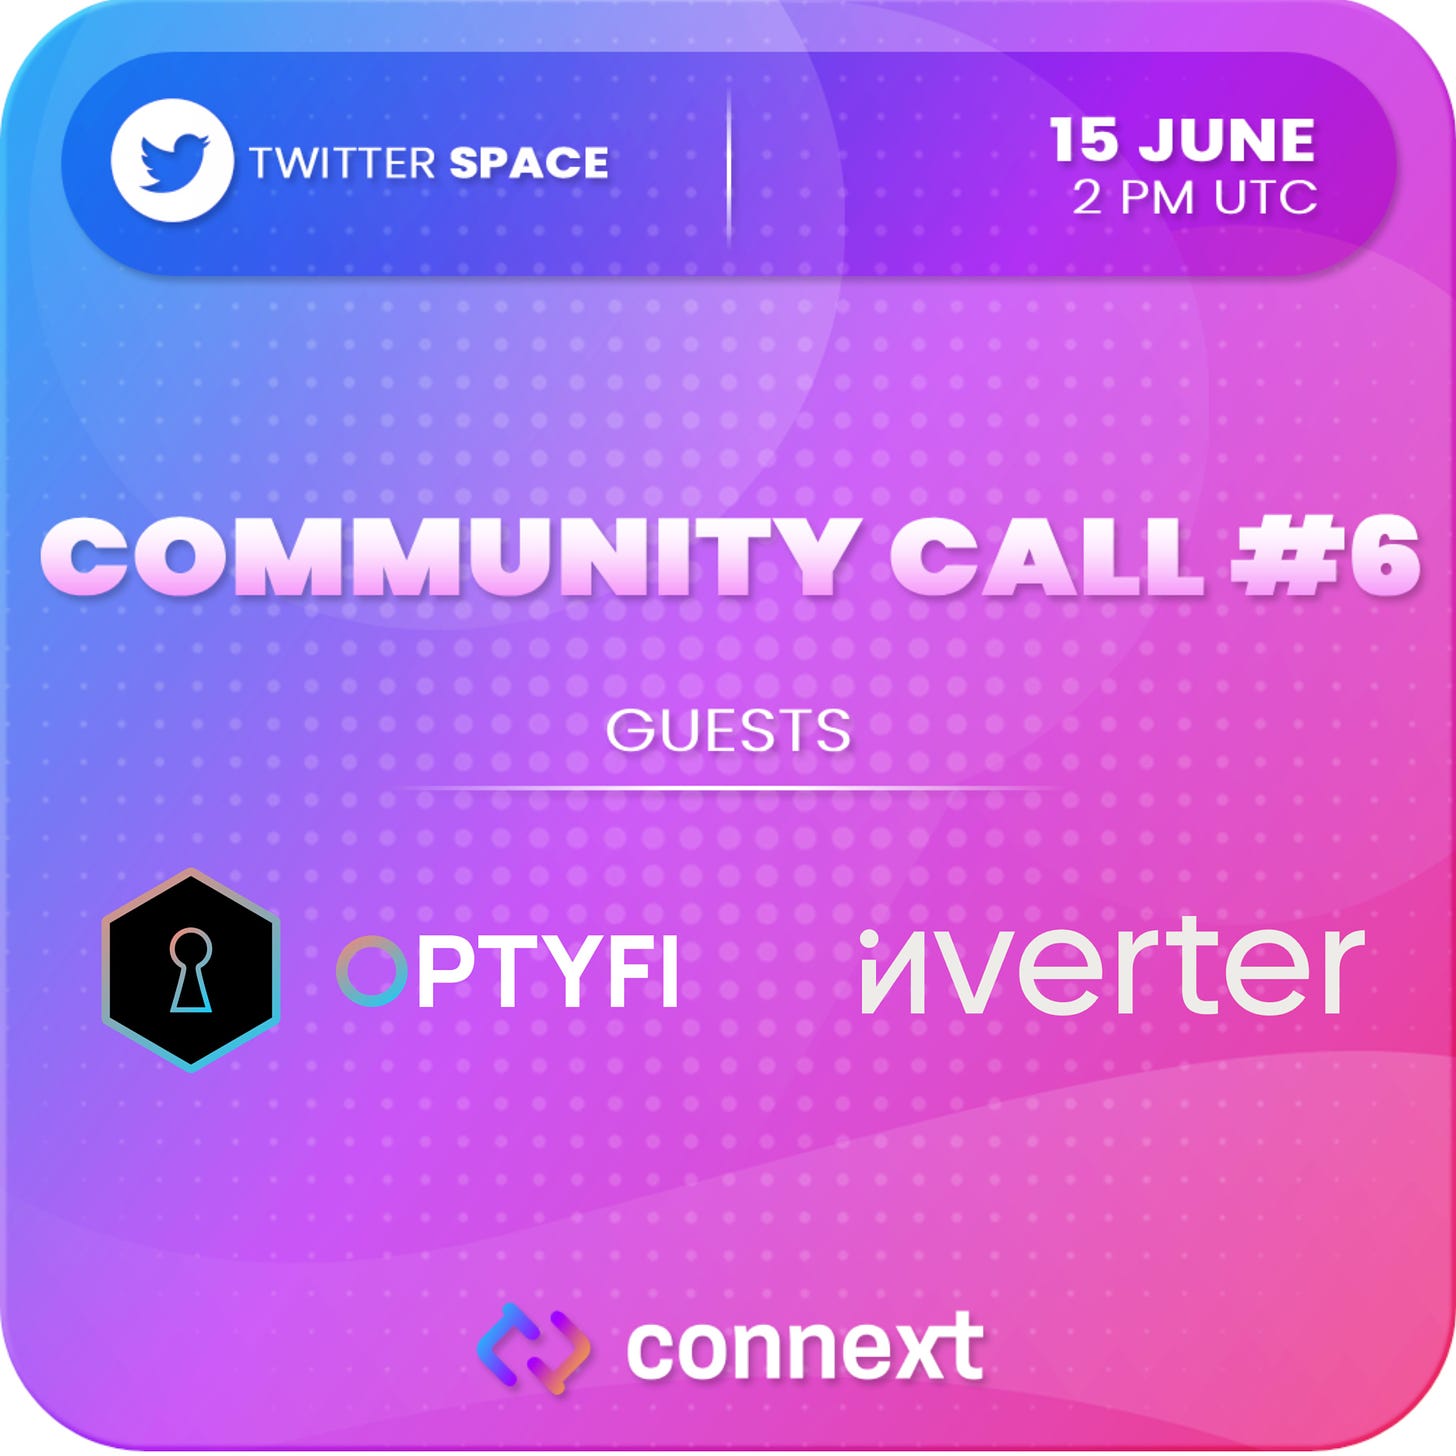 Community call to discuss the latest on Connext together with the latest integrators: the advanced yield aggregator OptyFi and Inverter